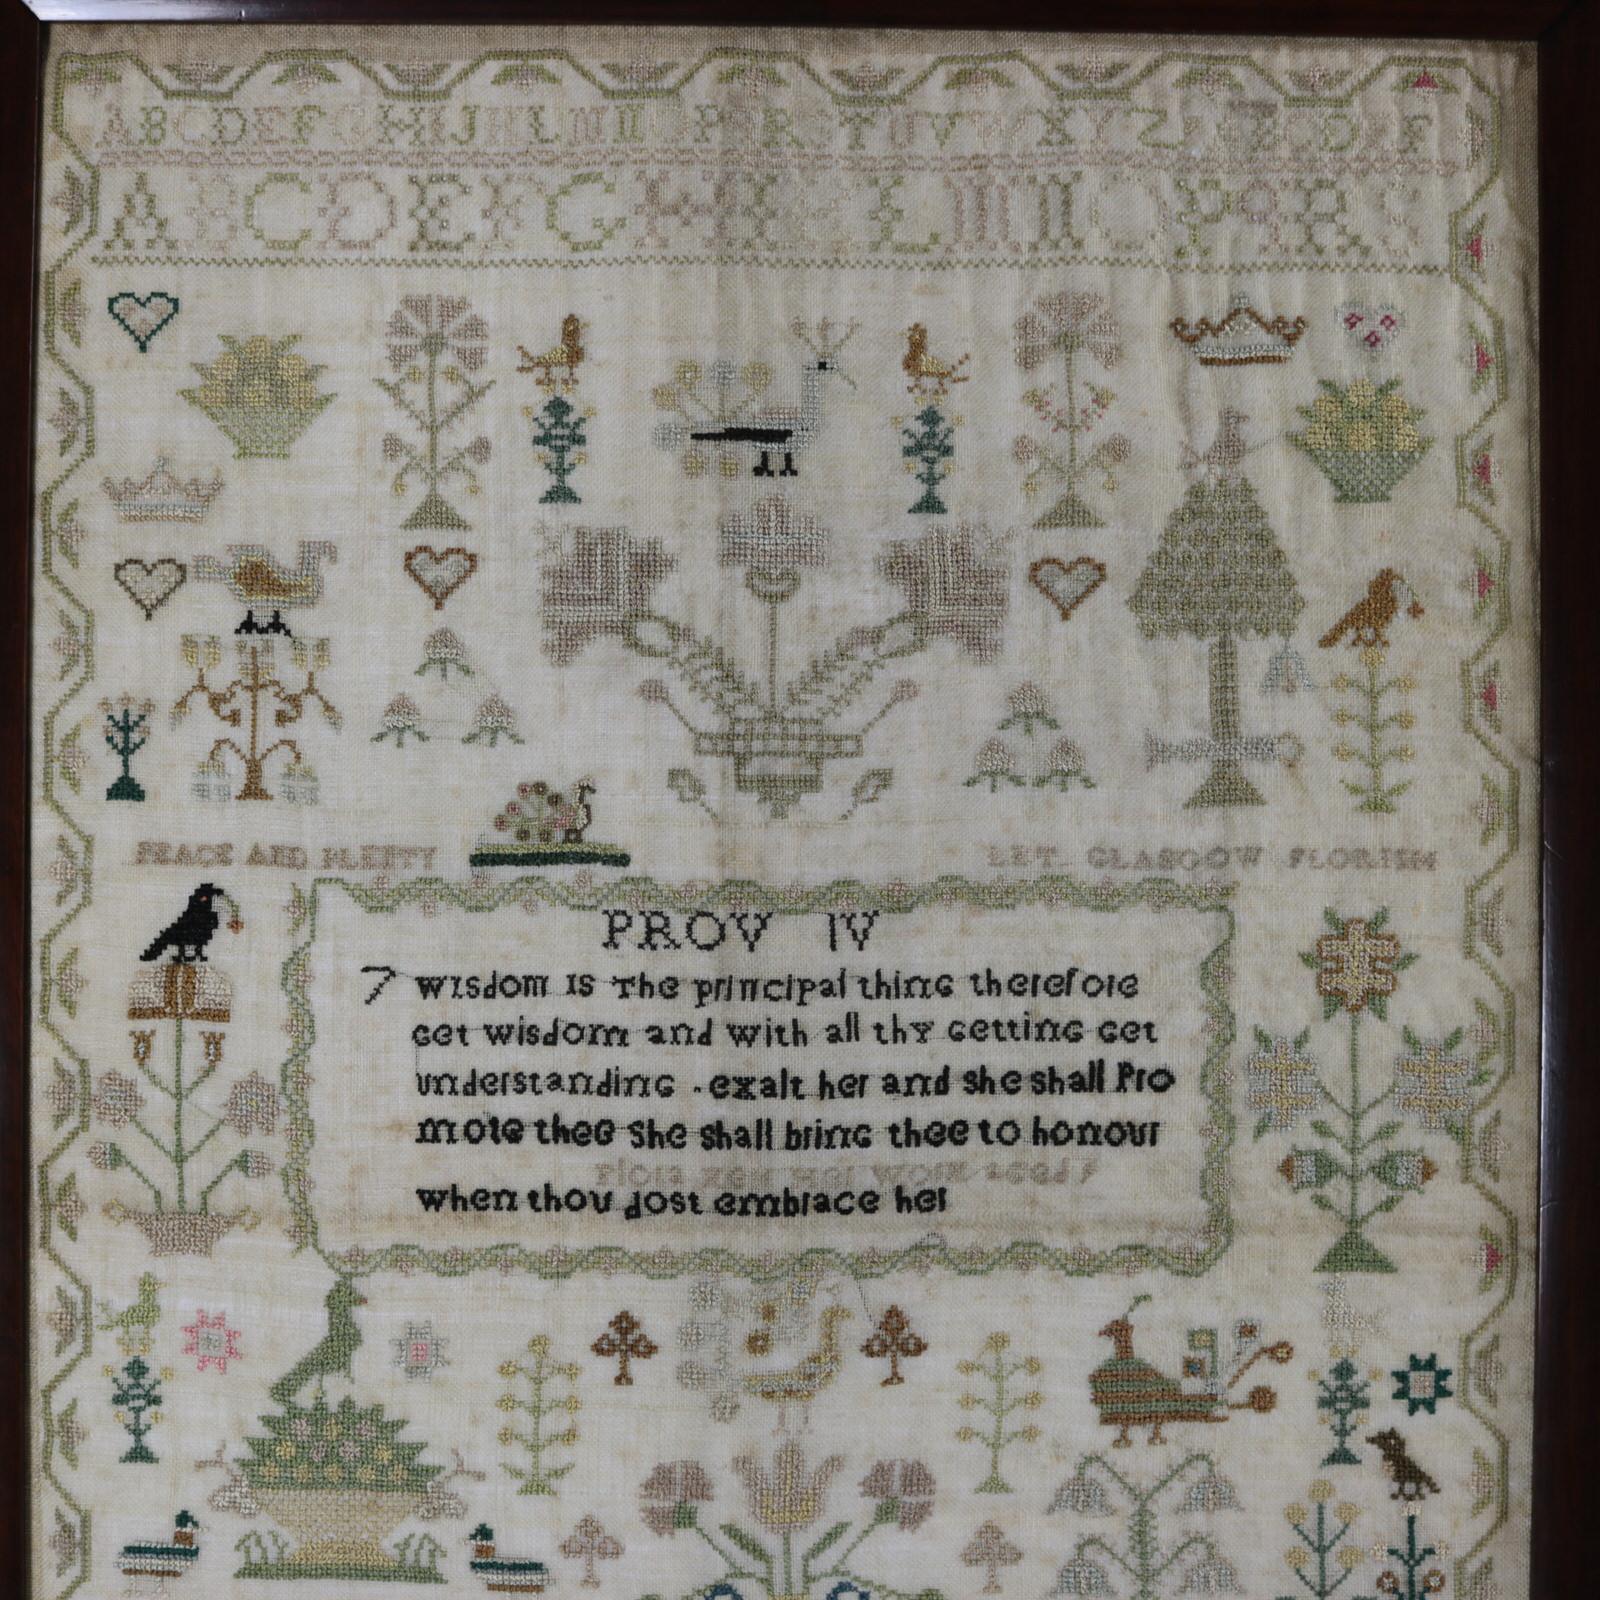 Scottish sampler, 1808, by Flora Kerr, Glasgow. The sampler is worked in silk on linen ground, in cross stitch and Algerian eye. Meandering strawberry border. Colours green, blue, light brown, copper, gold, black and pink. Alphabets A-Z in upper